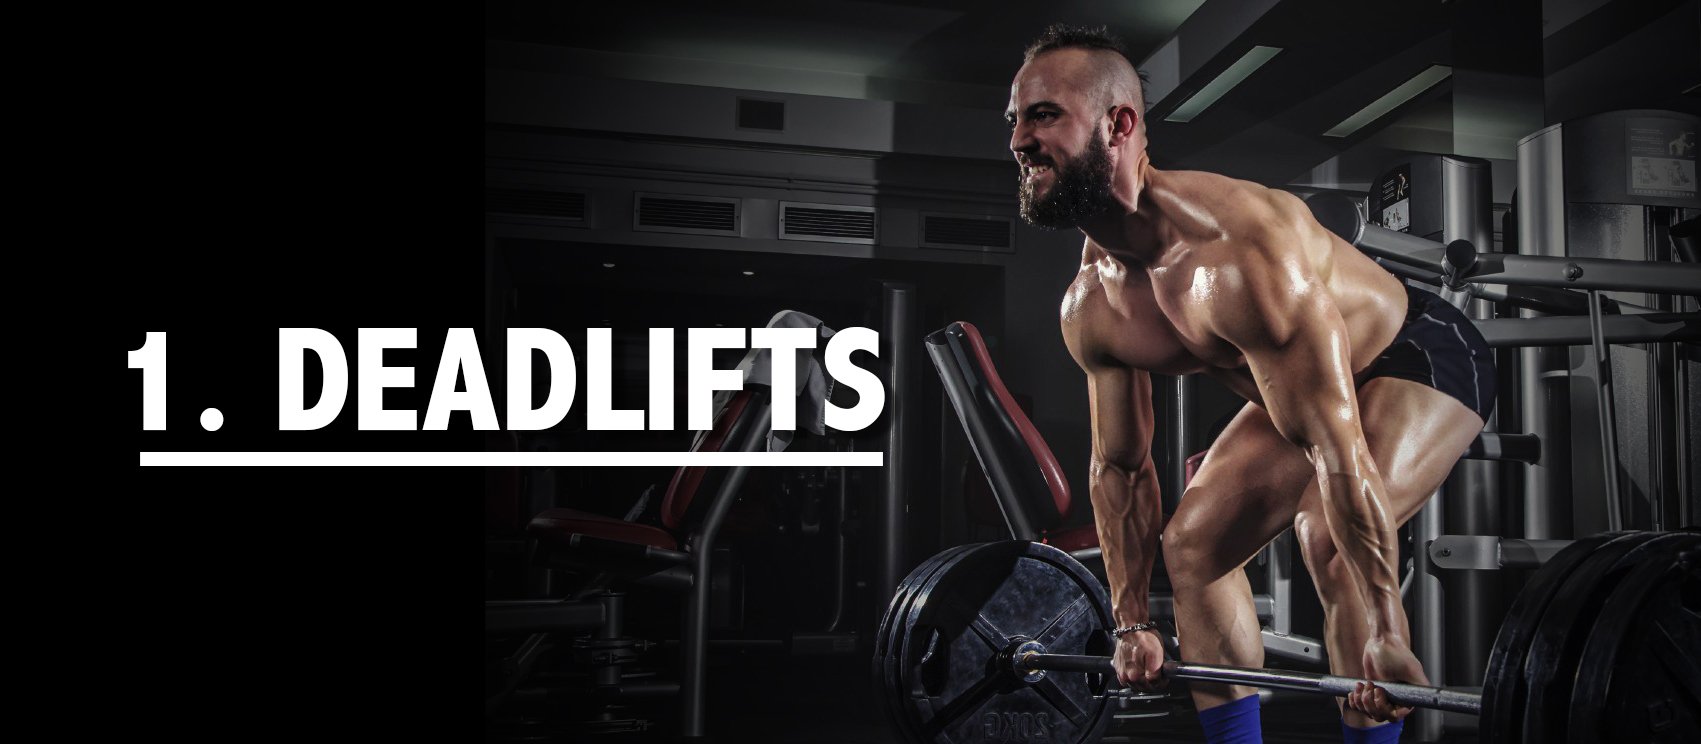 the-7-best-exercises-that-will-help-you-lose-belly-fat-deadlifts.jpg